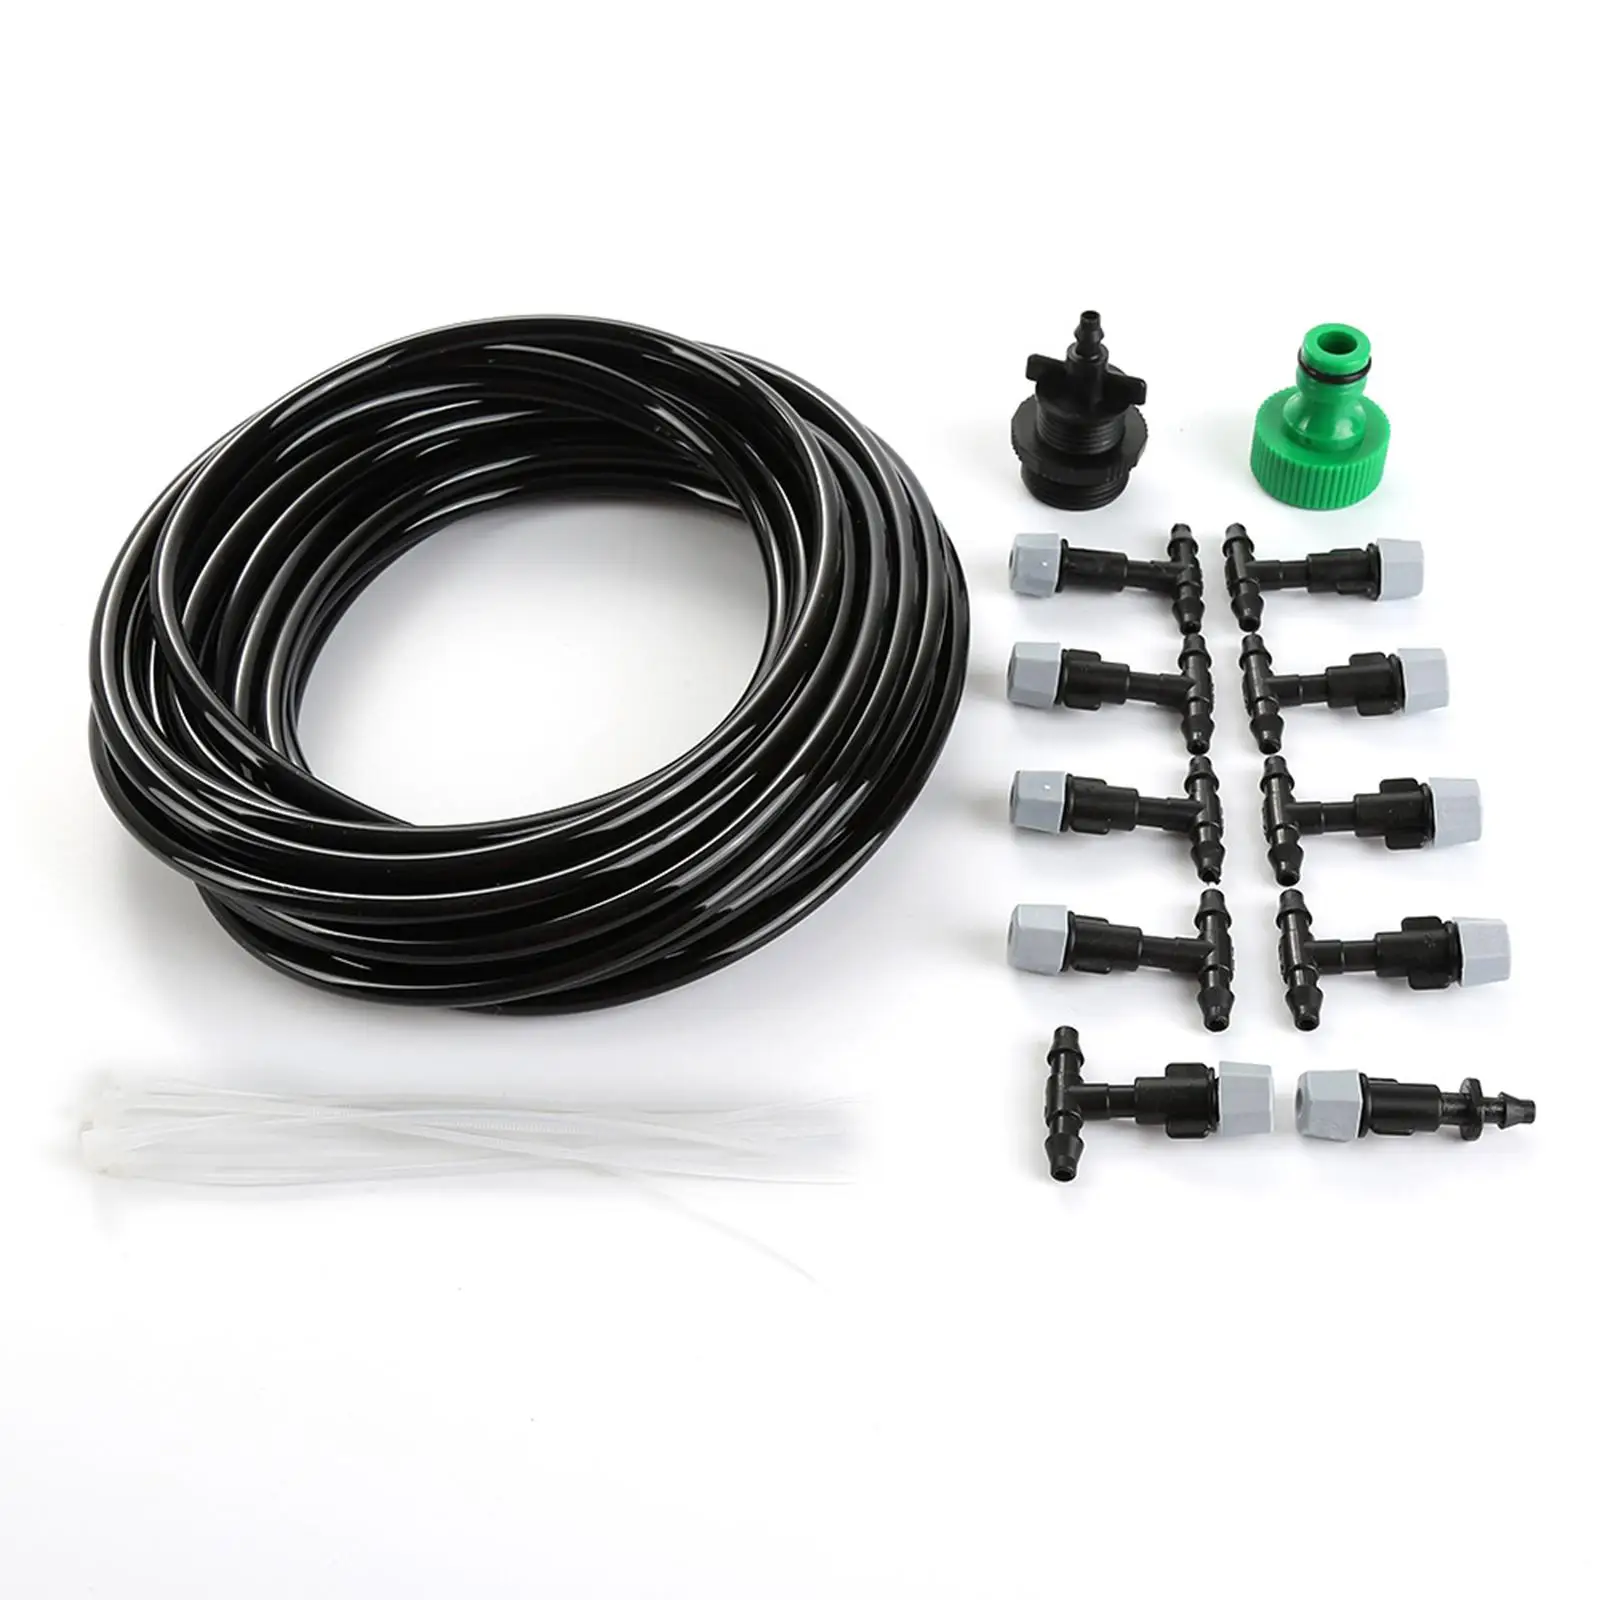 Water Mister Nozzles Nozzle Set Garden Supplies Easy to Install Detachable Water Misting Cooling System for Greenhouse Summer